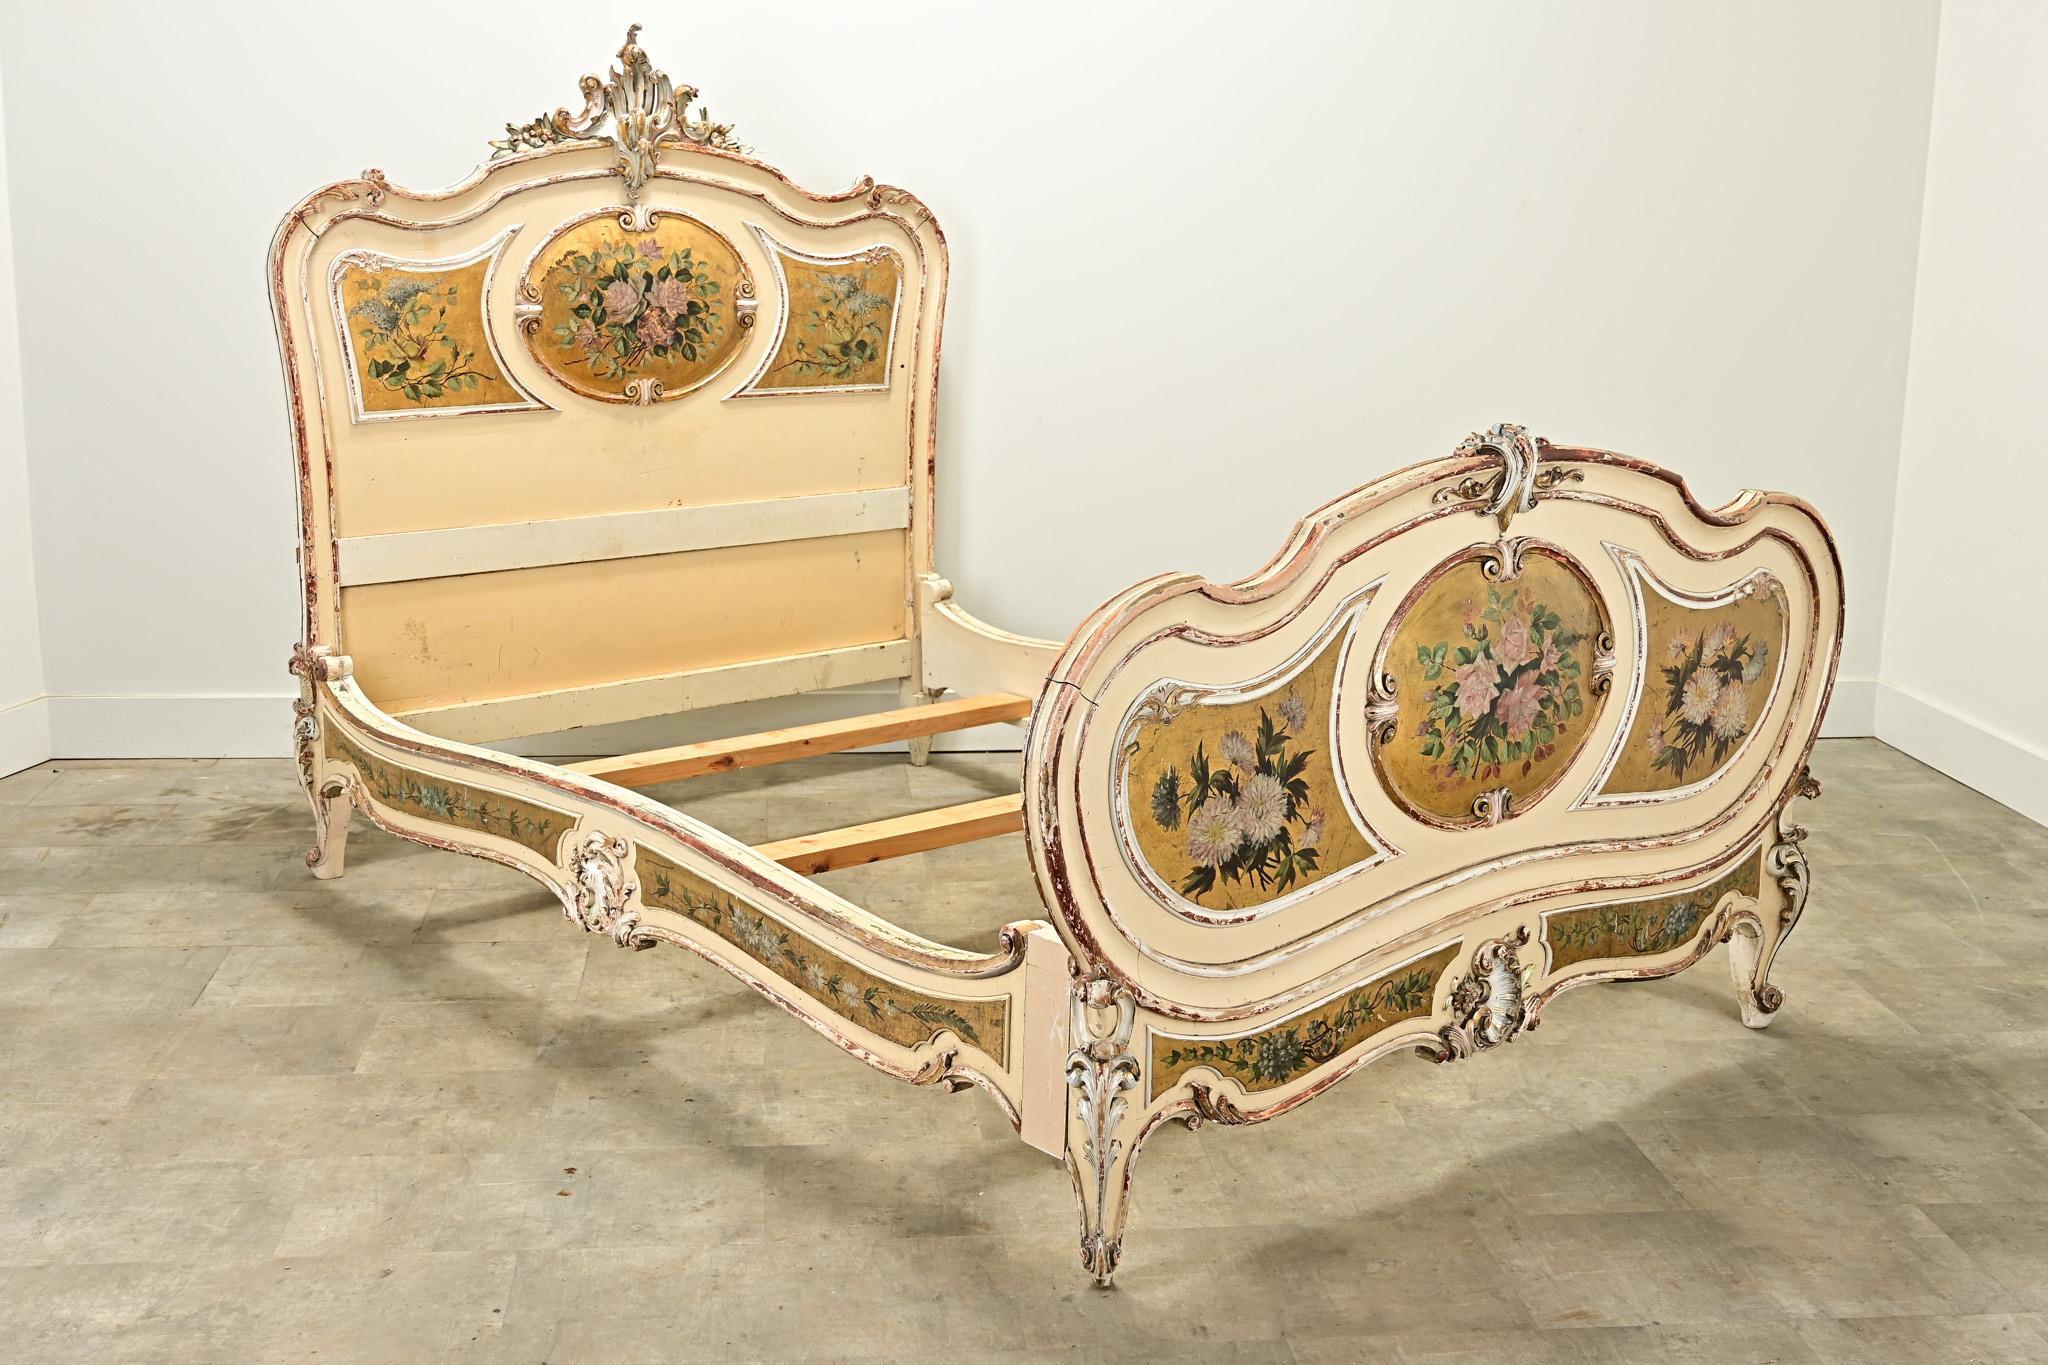 A quality Louis XV Period carved and gold gilt queen bed frame. The four piece frame has classic carvings of Rococo influenced Louis XV style with flamboyant carvings and gold gilt cartouches with hand painted flowers. The bedrails have been